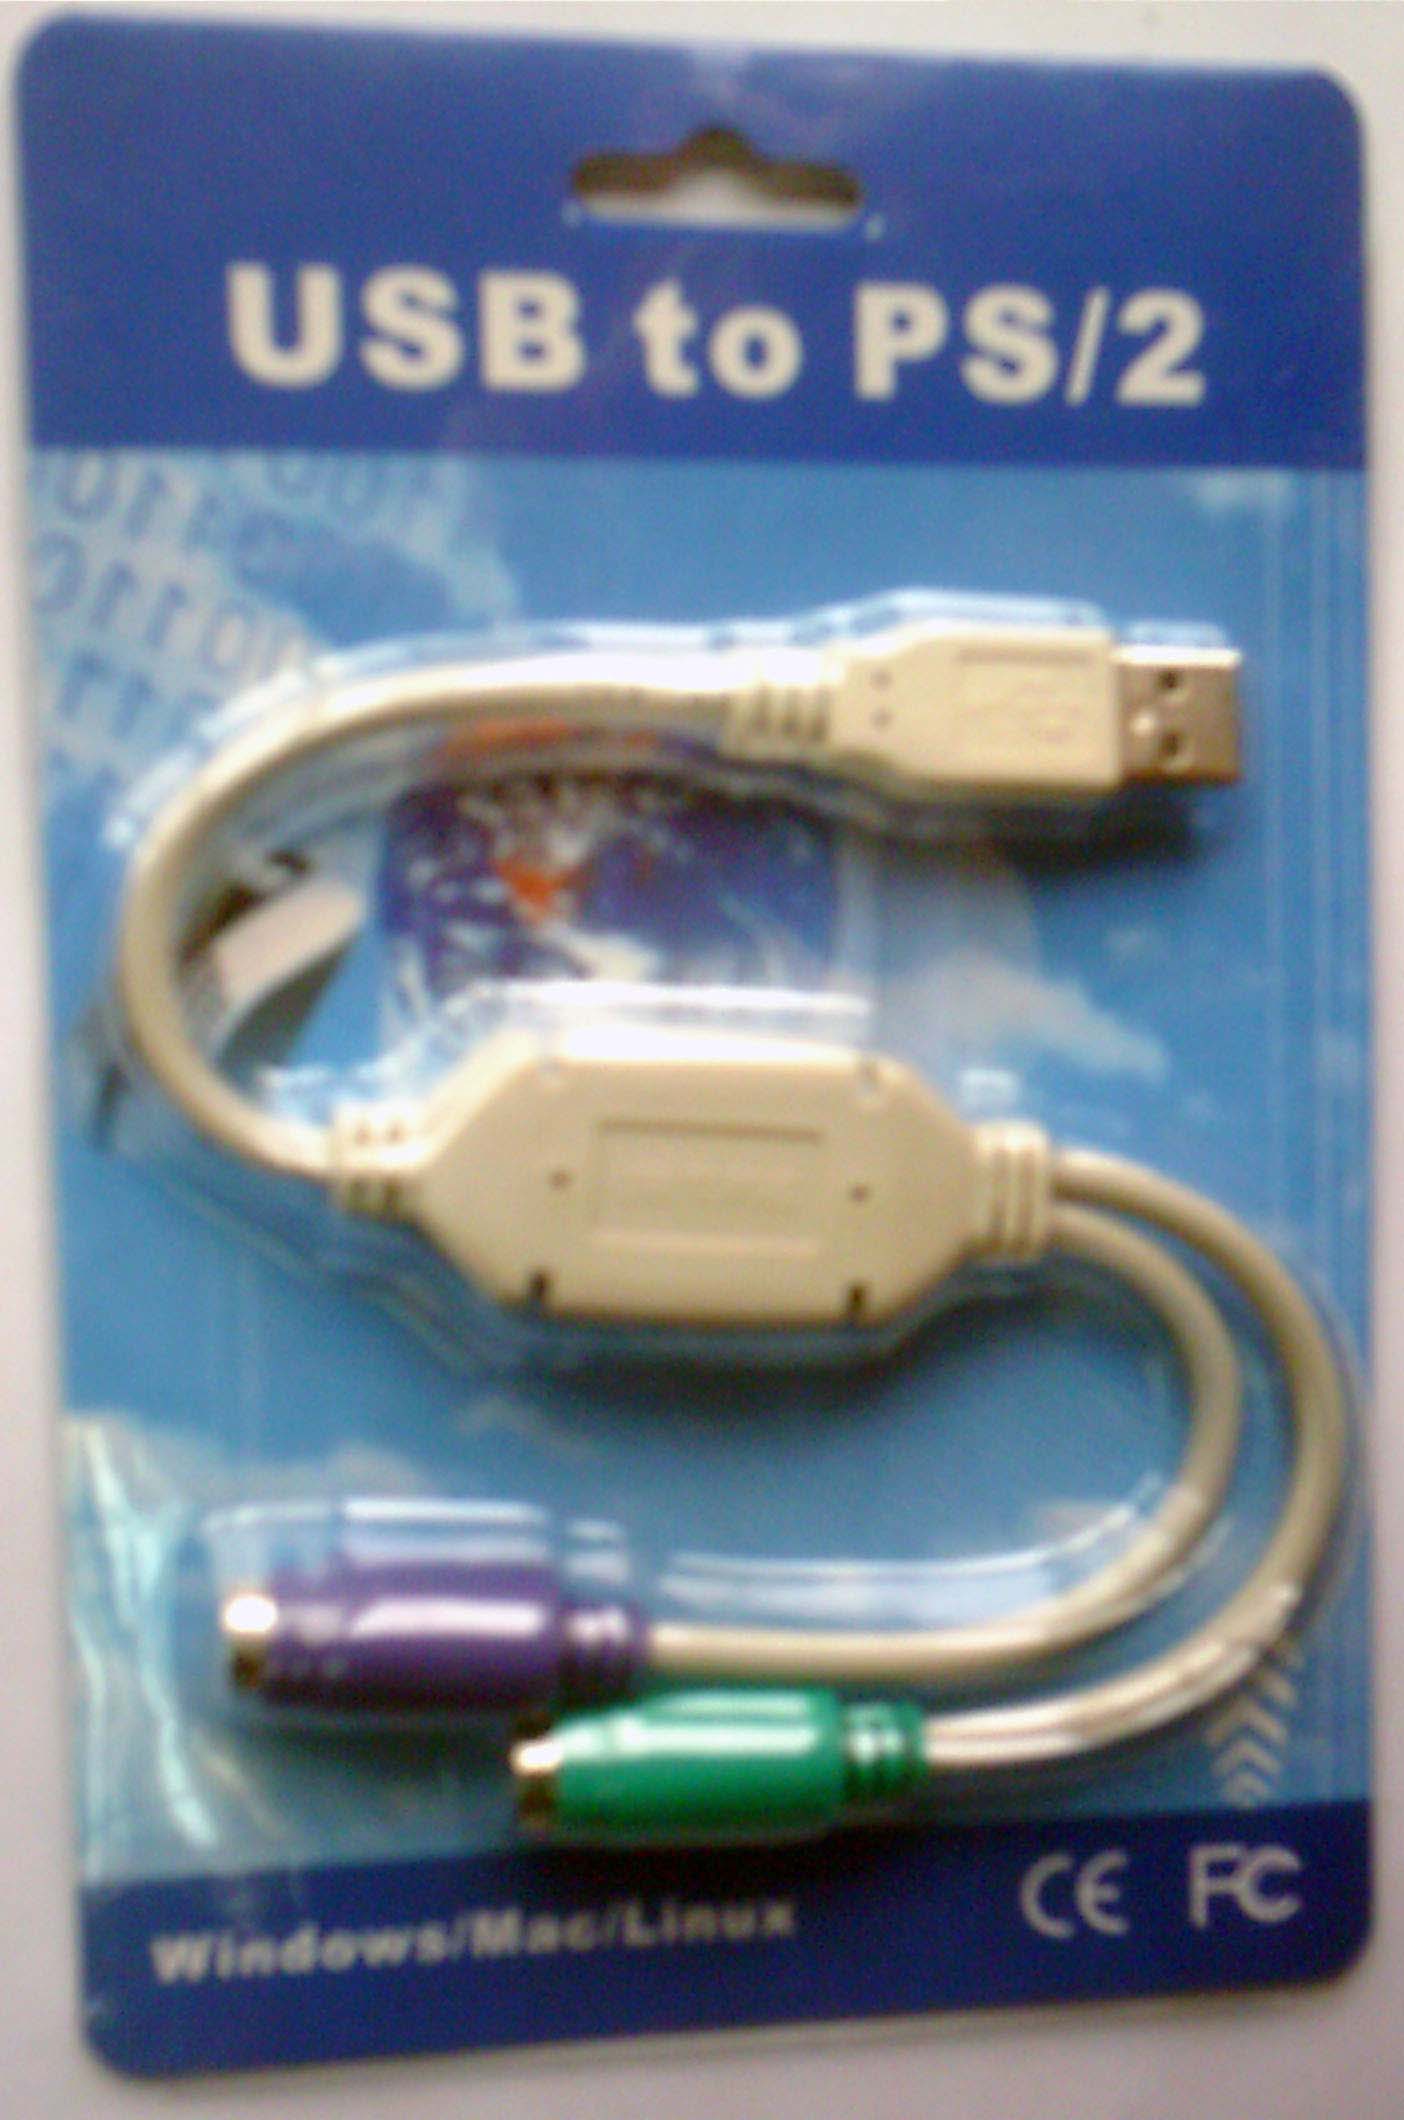 USB to PS/2